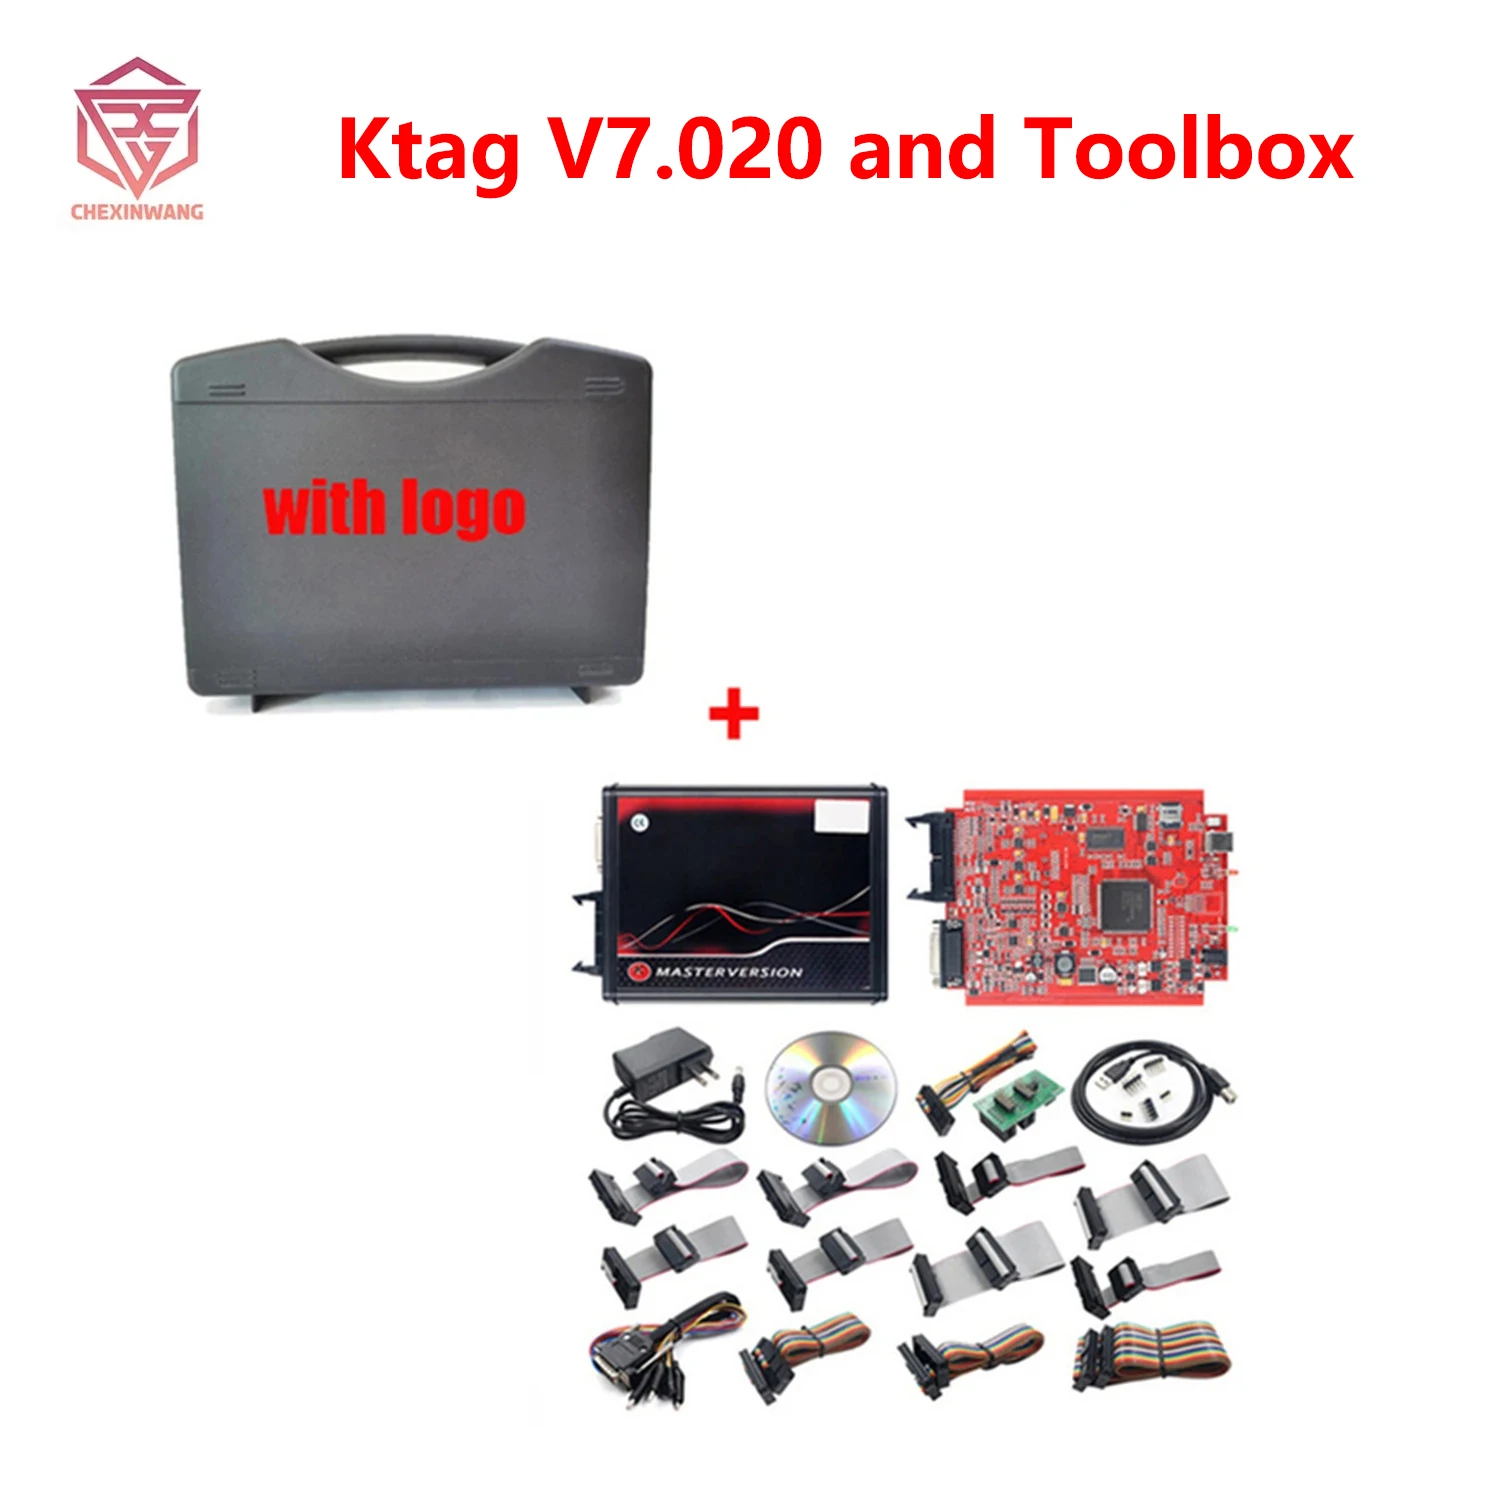 

ECU Tool For Ktag V7.020 KESS V2.8 V2 V5.017 BDM Frame SW V2.25 v2.47 4 LED 22pcs Adapters K-TAG ECU Programmer with Toolbox